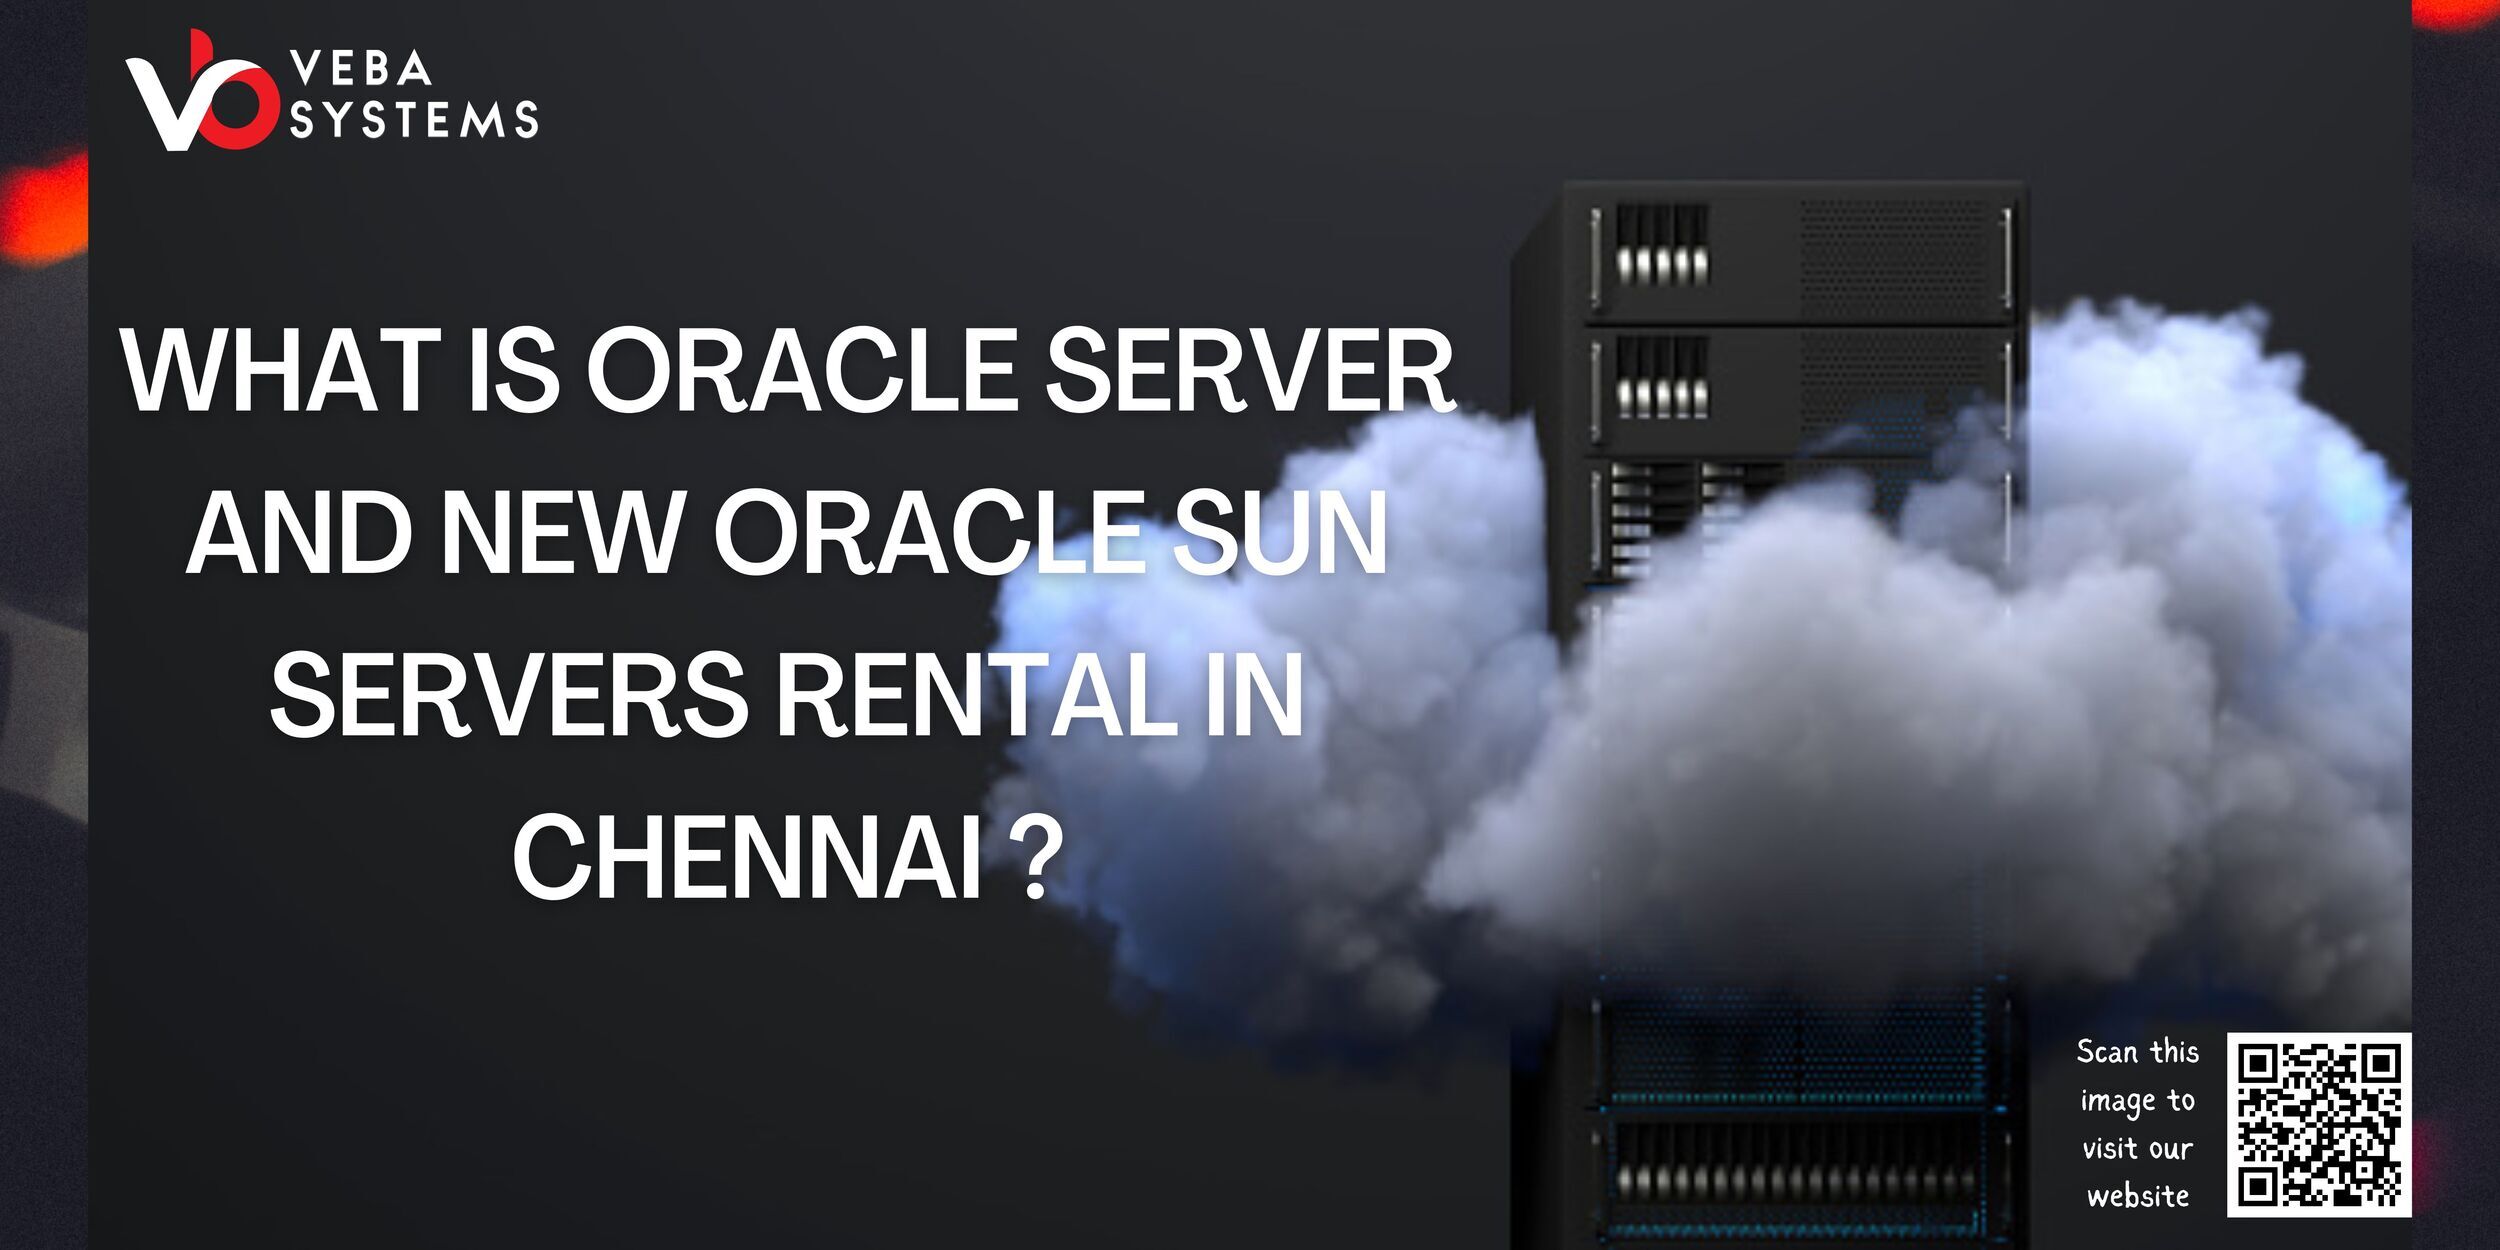 What is Oracle server?